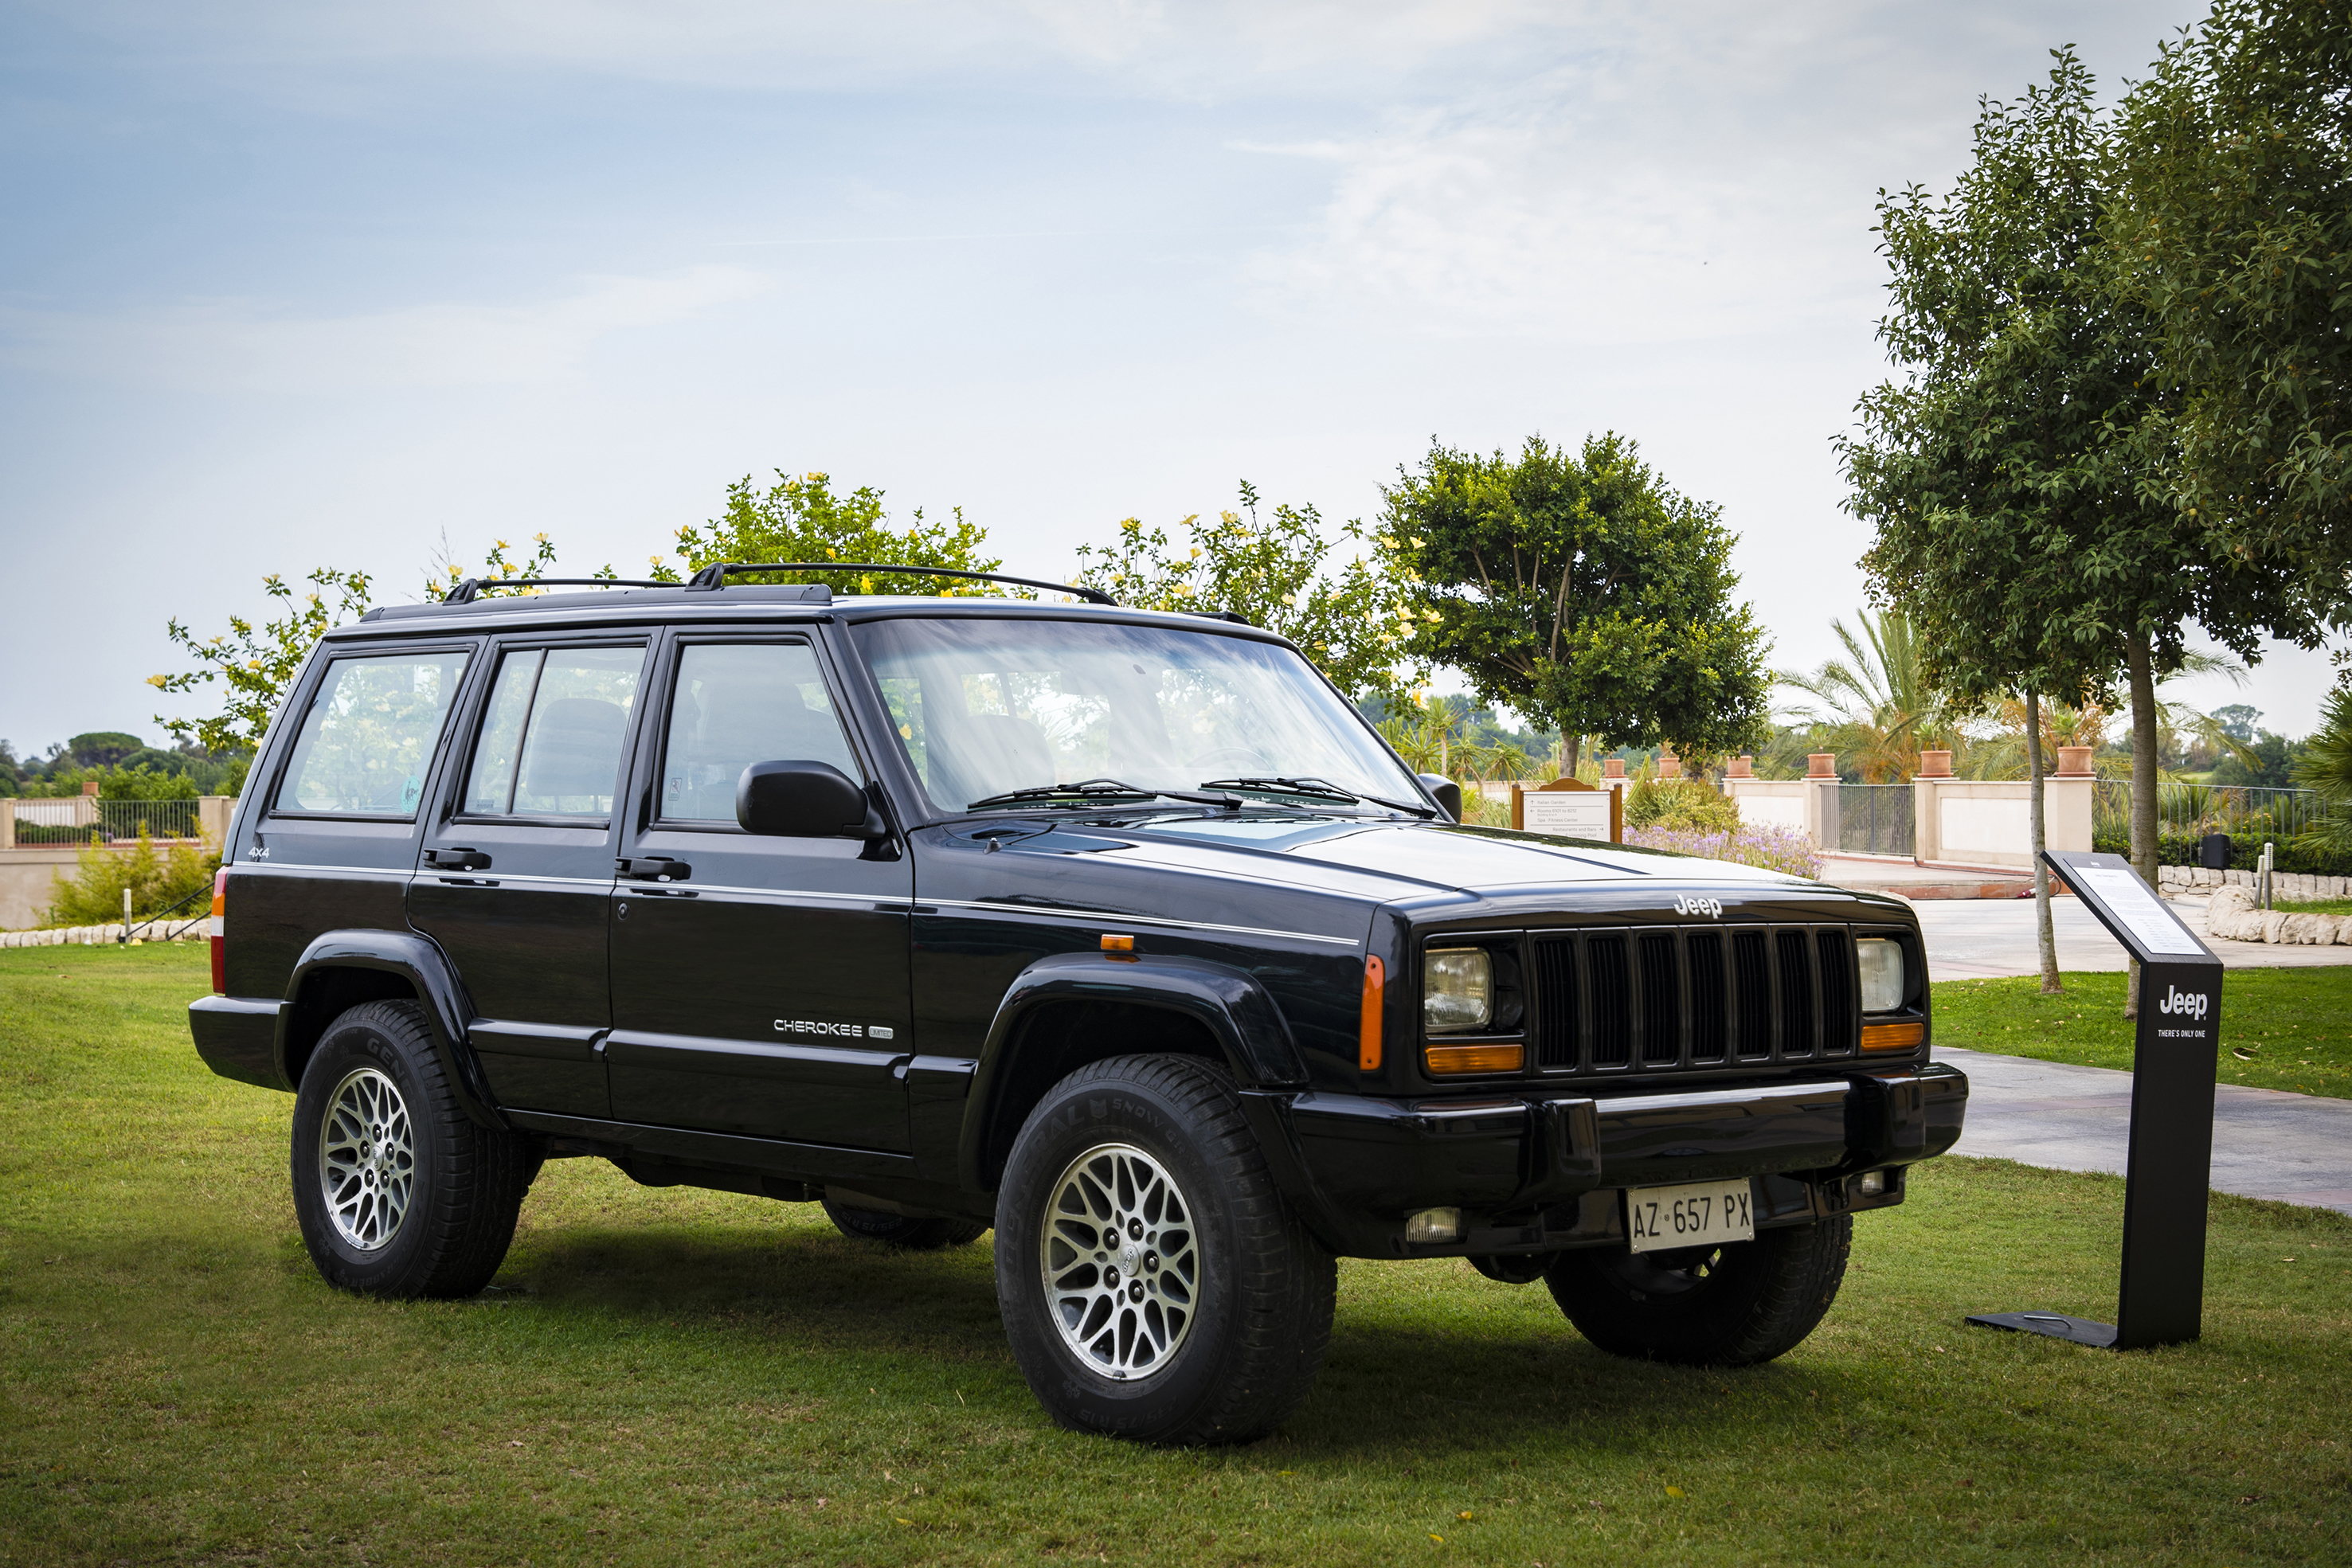 Jeep Cherokee History 44 YEARS OffRoading Videos